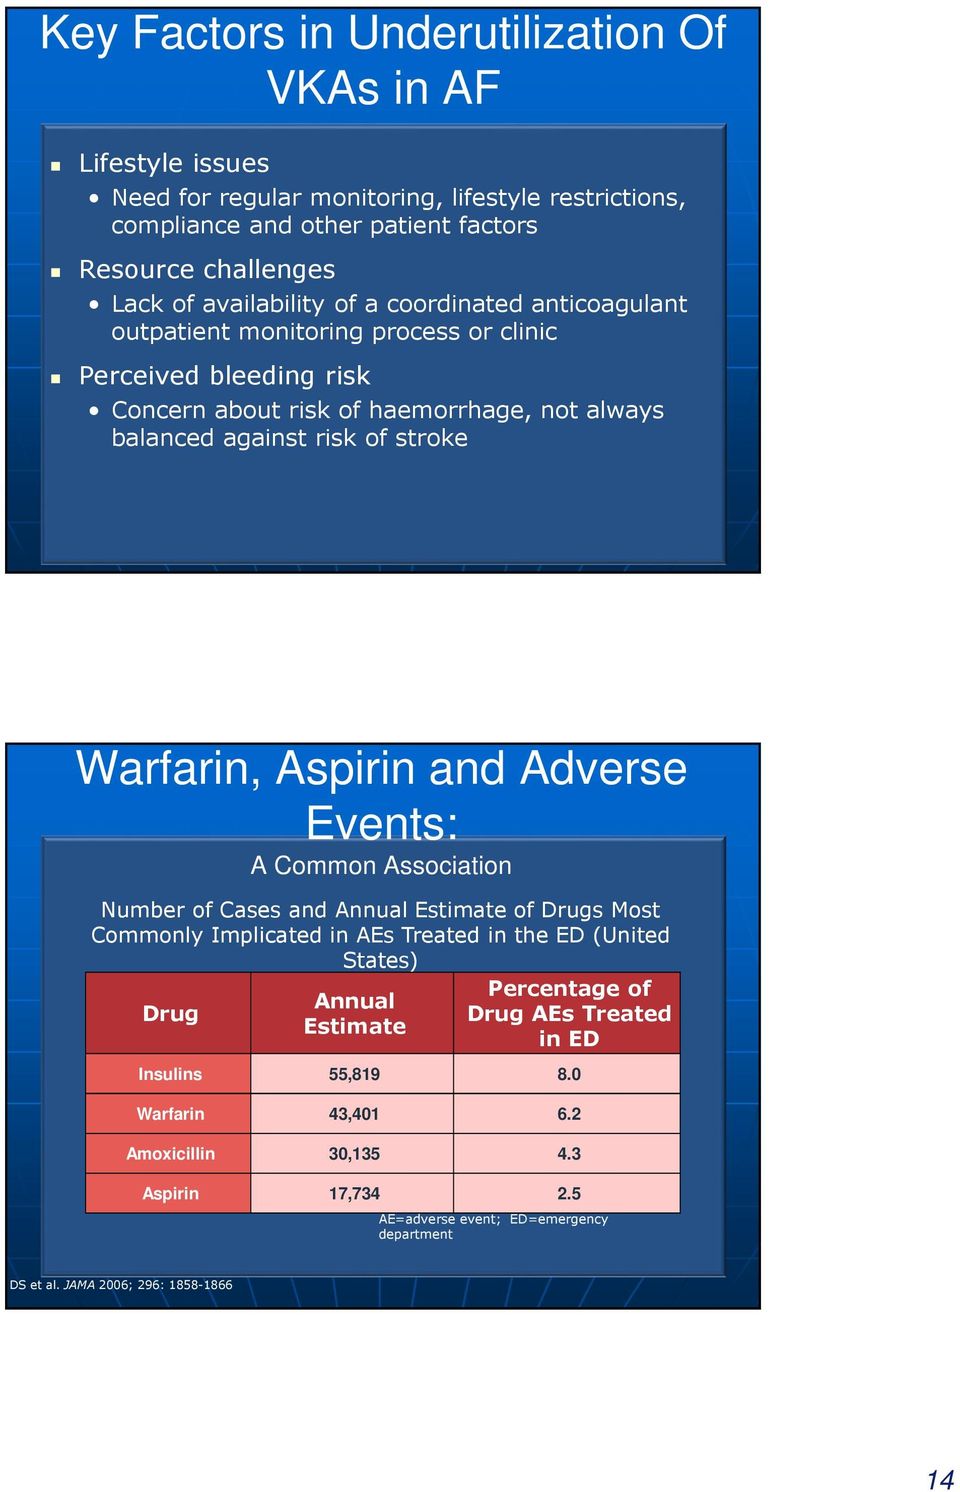 Warfarin, Aspirin and Adverse Events: A Common Association Number of Cases and Annual Estimate of Drugs Most Commonly Implicated in AEs Treated in the ED (United States) Drug Annual Estimate